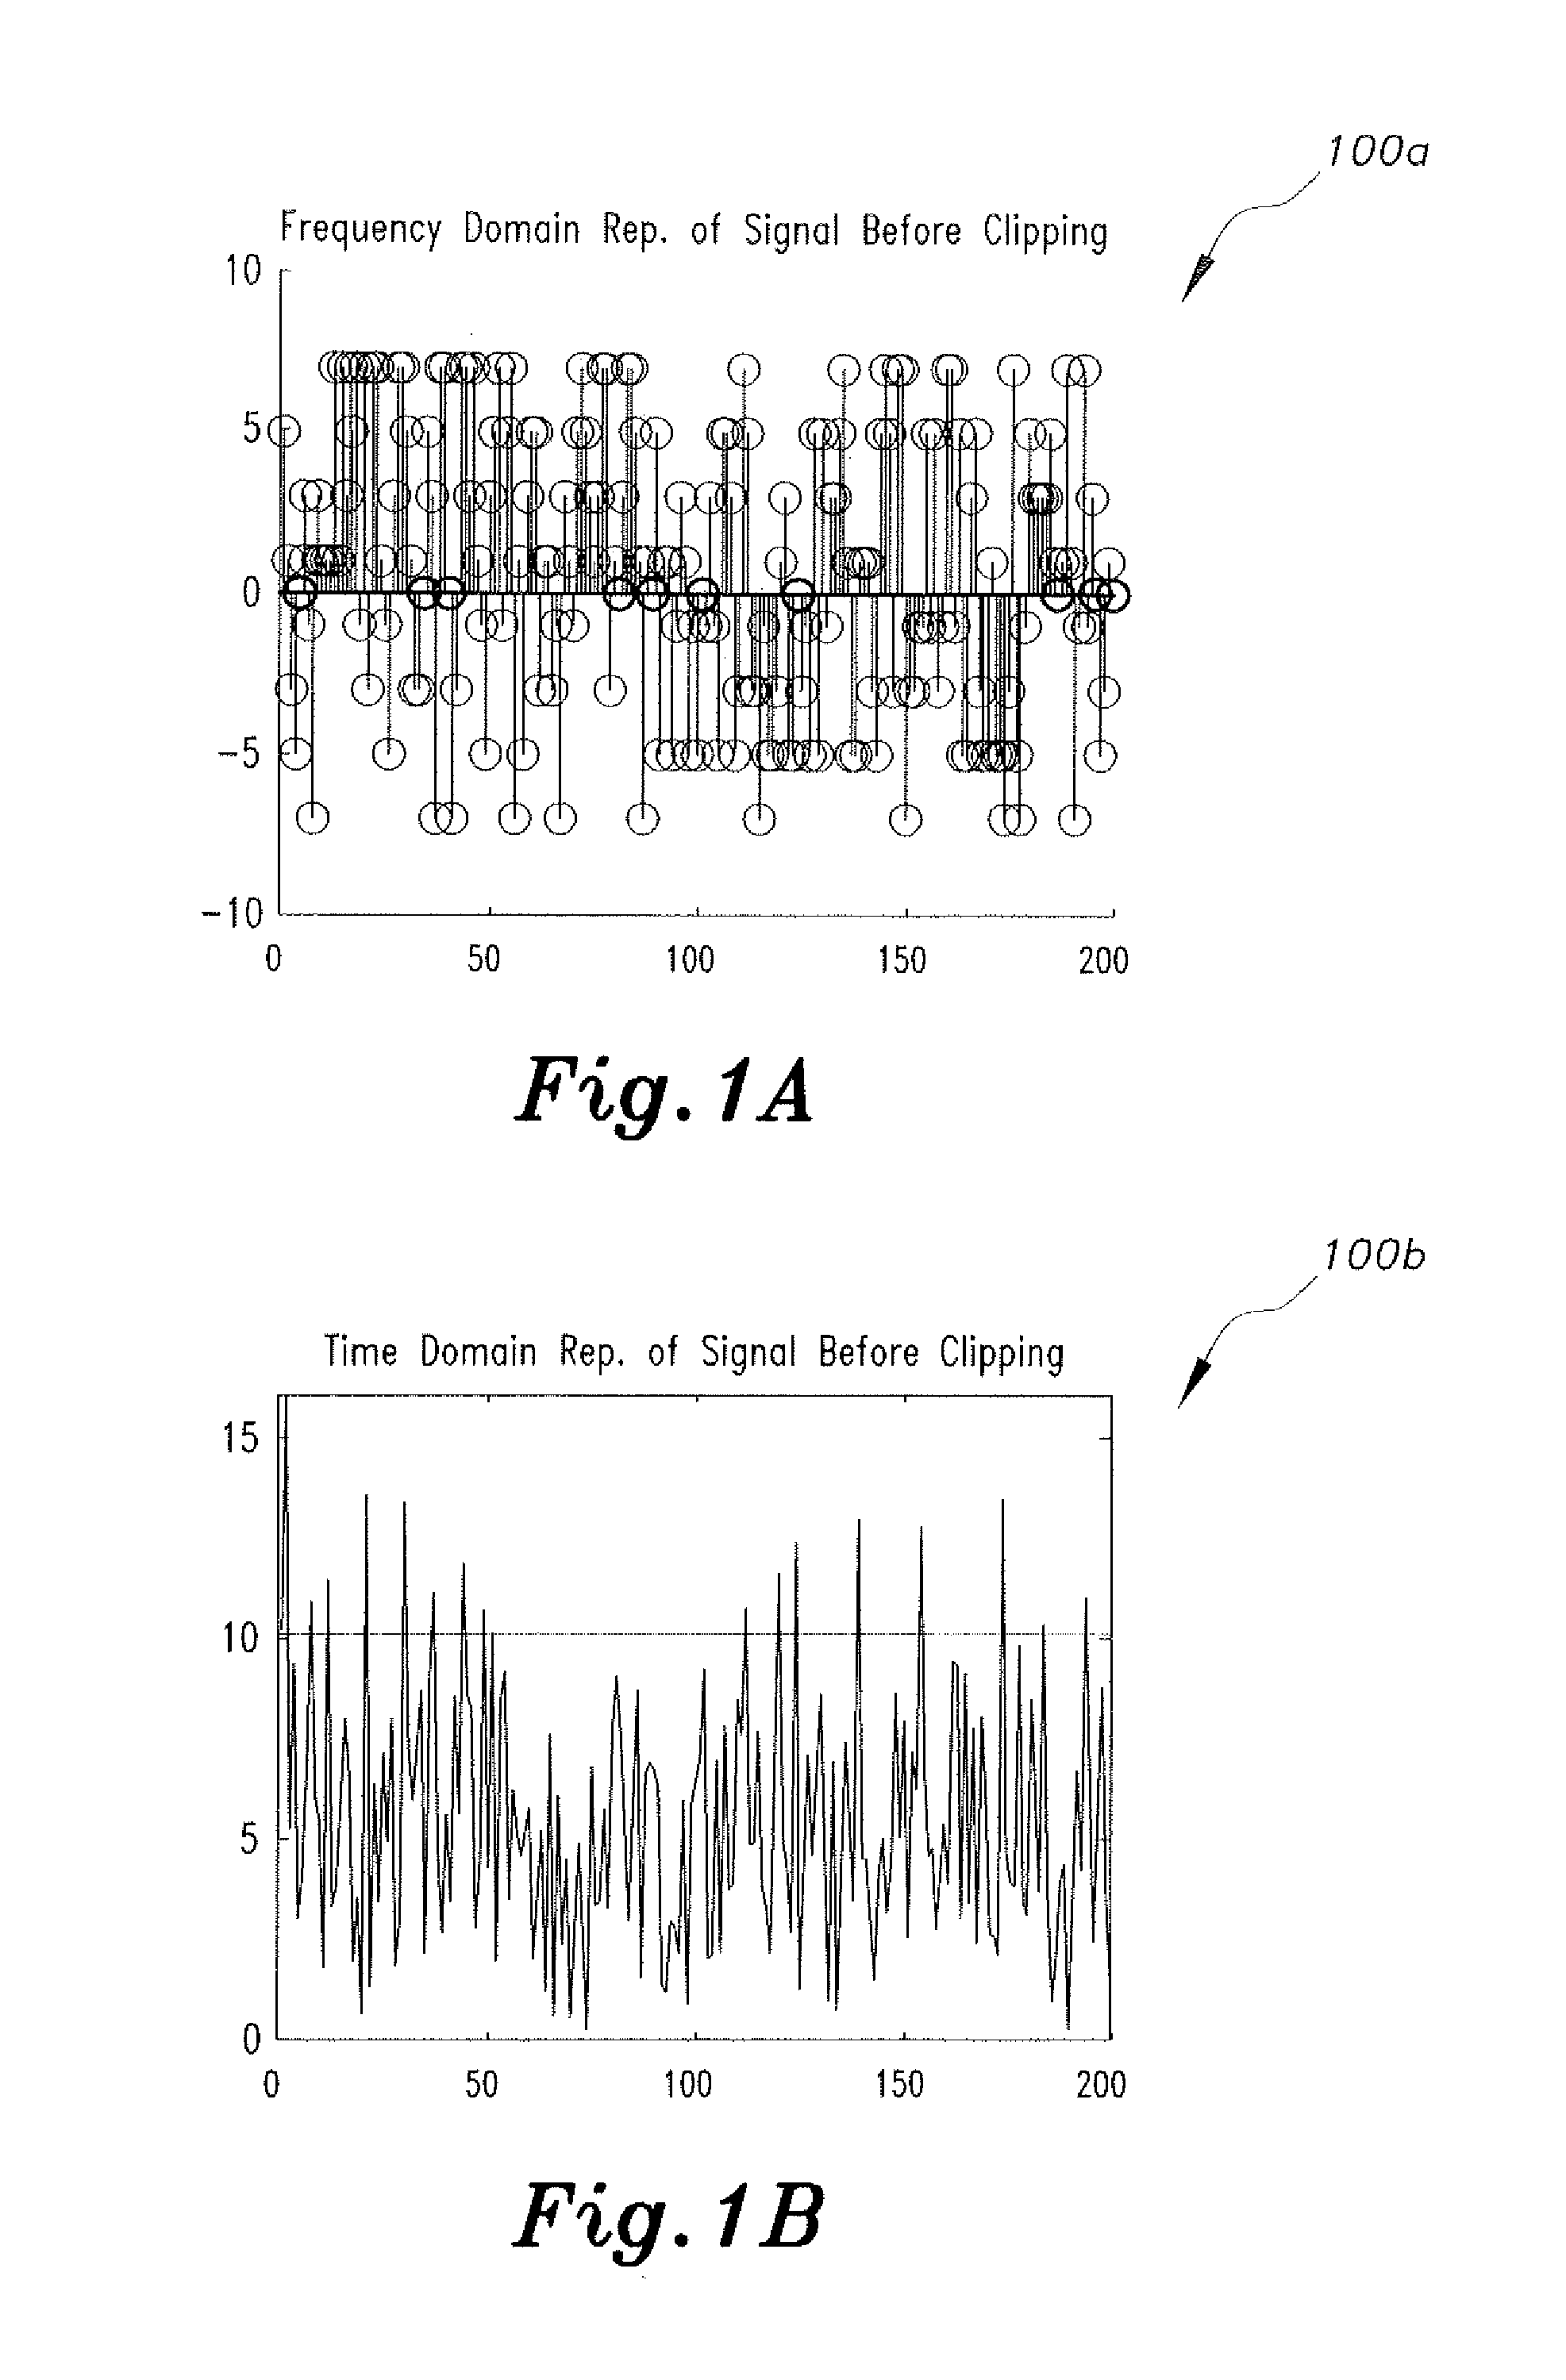 Method of performing peak reduction and clipping mitigation